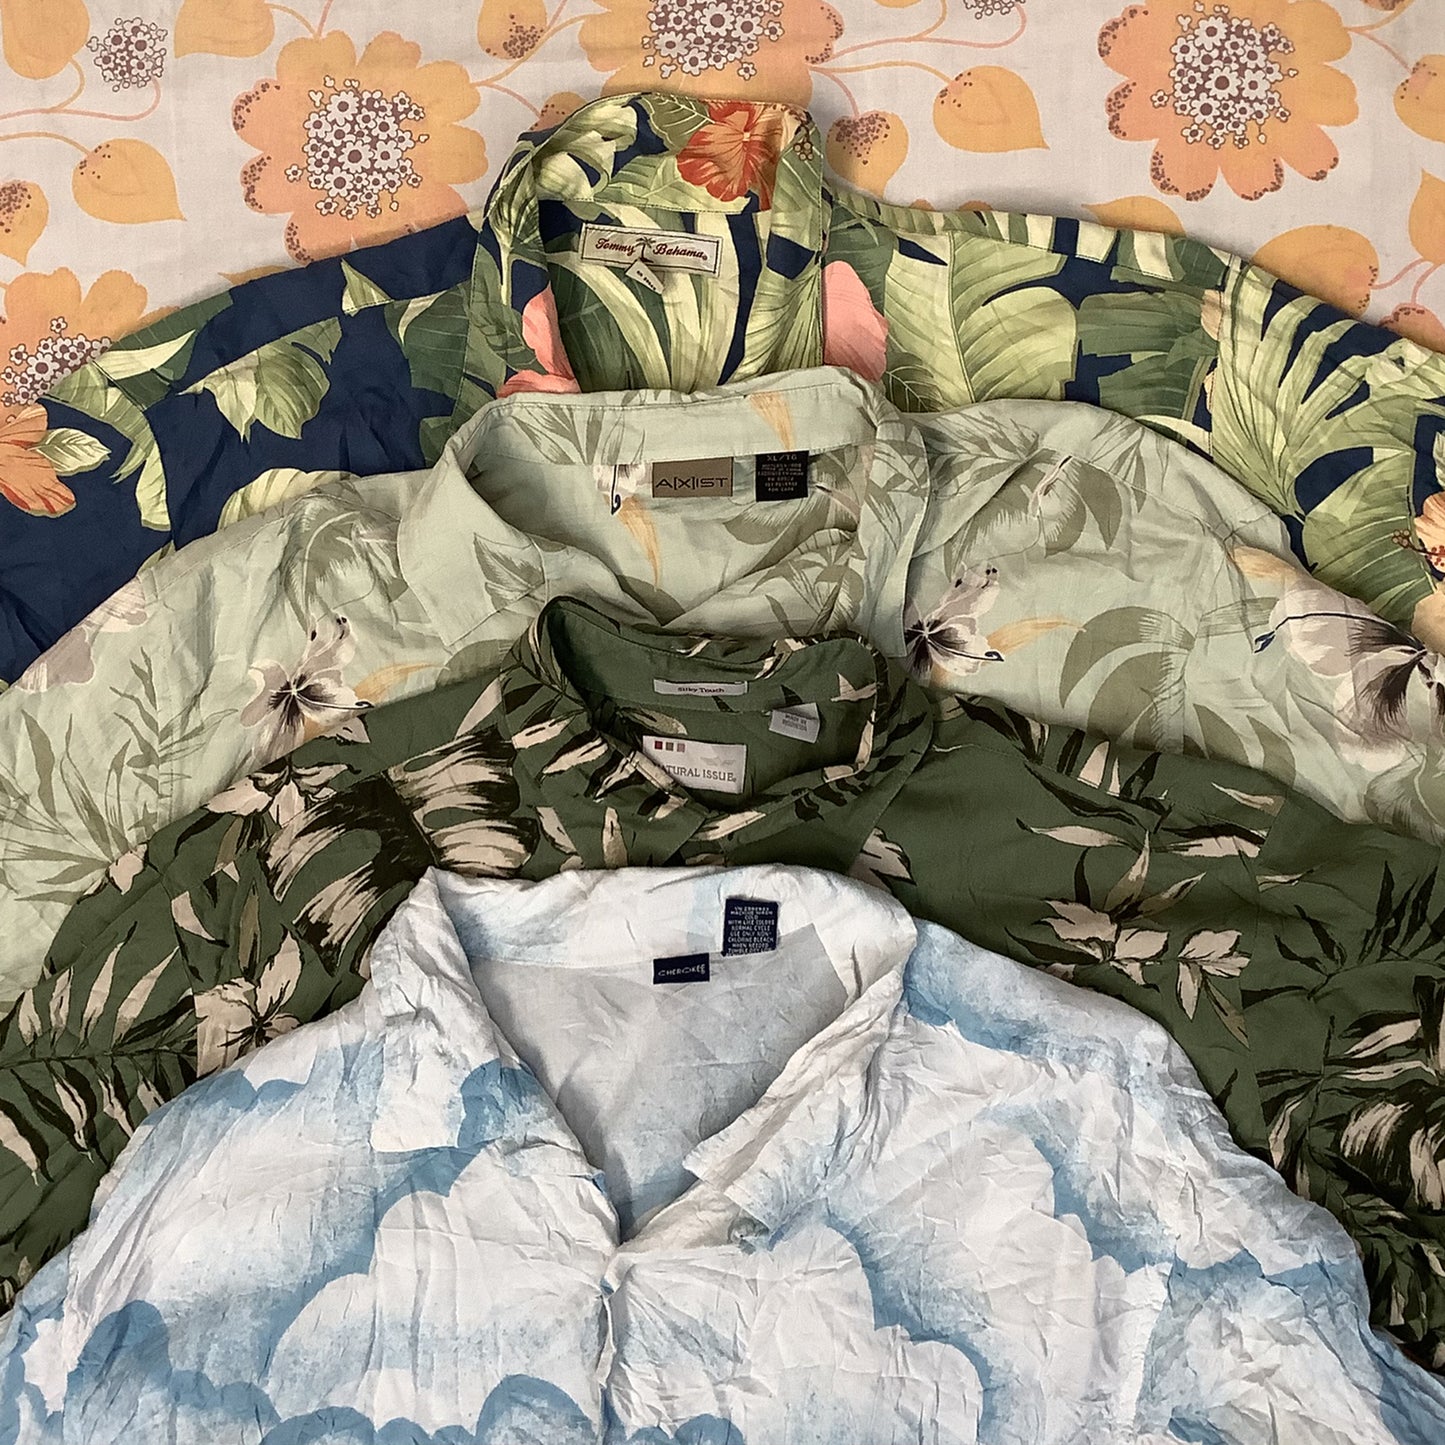 Wholesale vintage and secondhand mixed bundles of Hawaiian shirts. Choose from Grade A, B or ungraded to bulk buy per kilo, piece or bale. Handpick available in Sussex warehouse of Brighton's biggest vintage retailer or shop at kilo sale events.